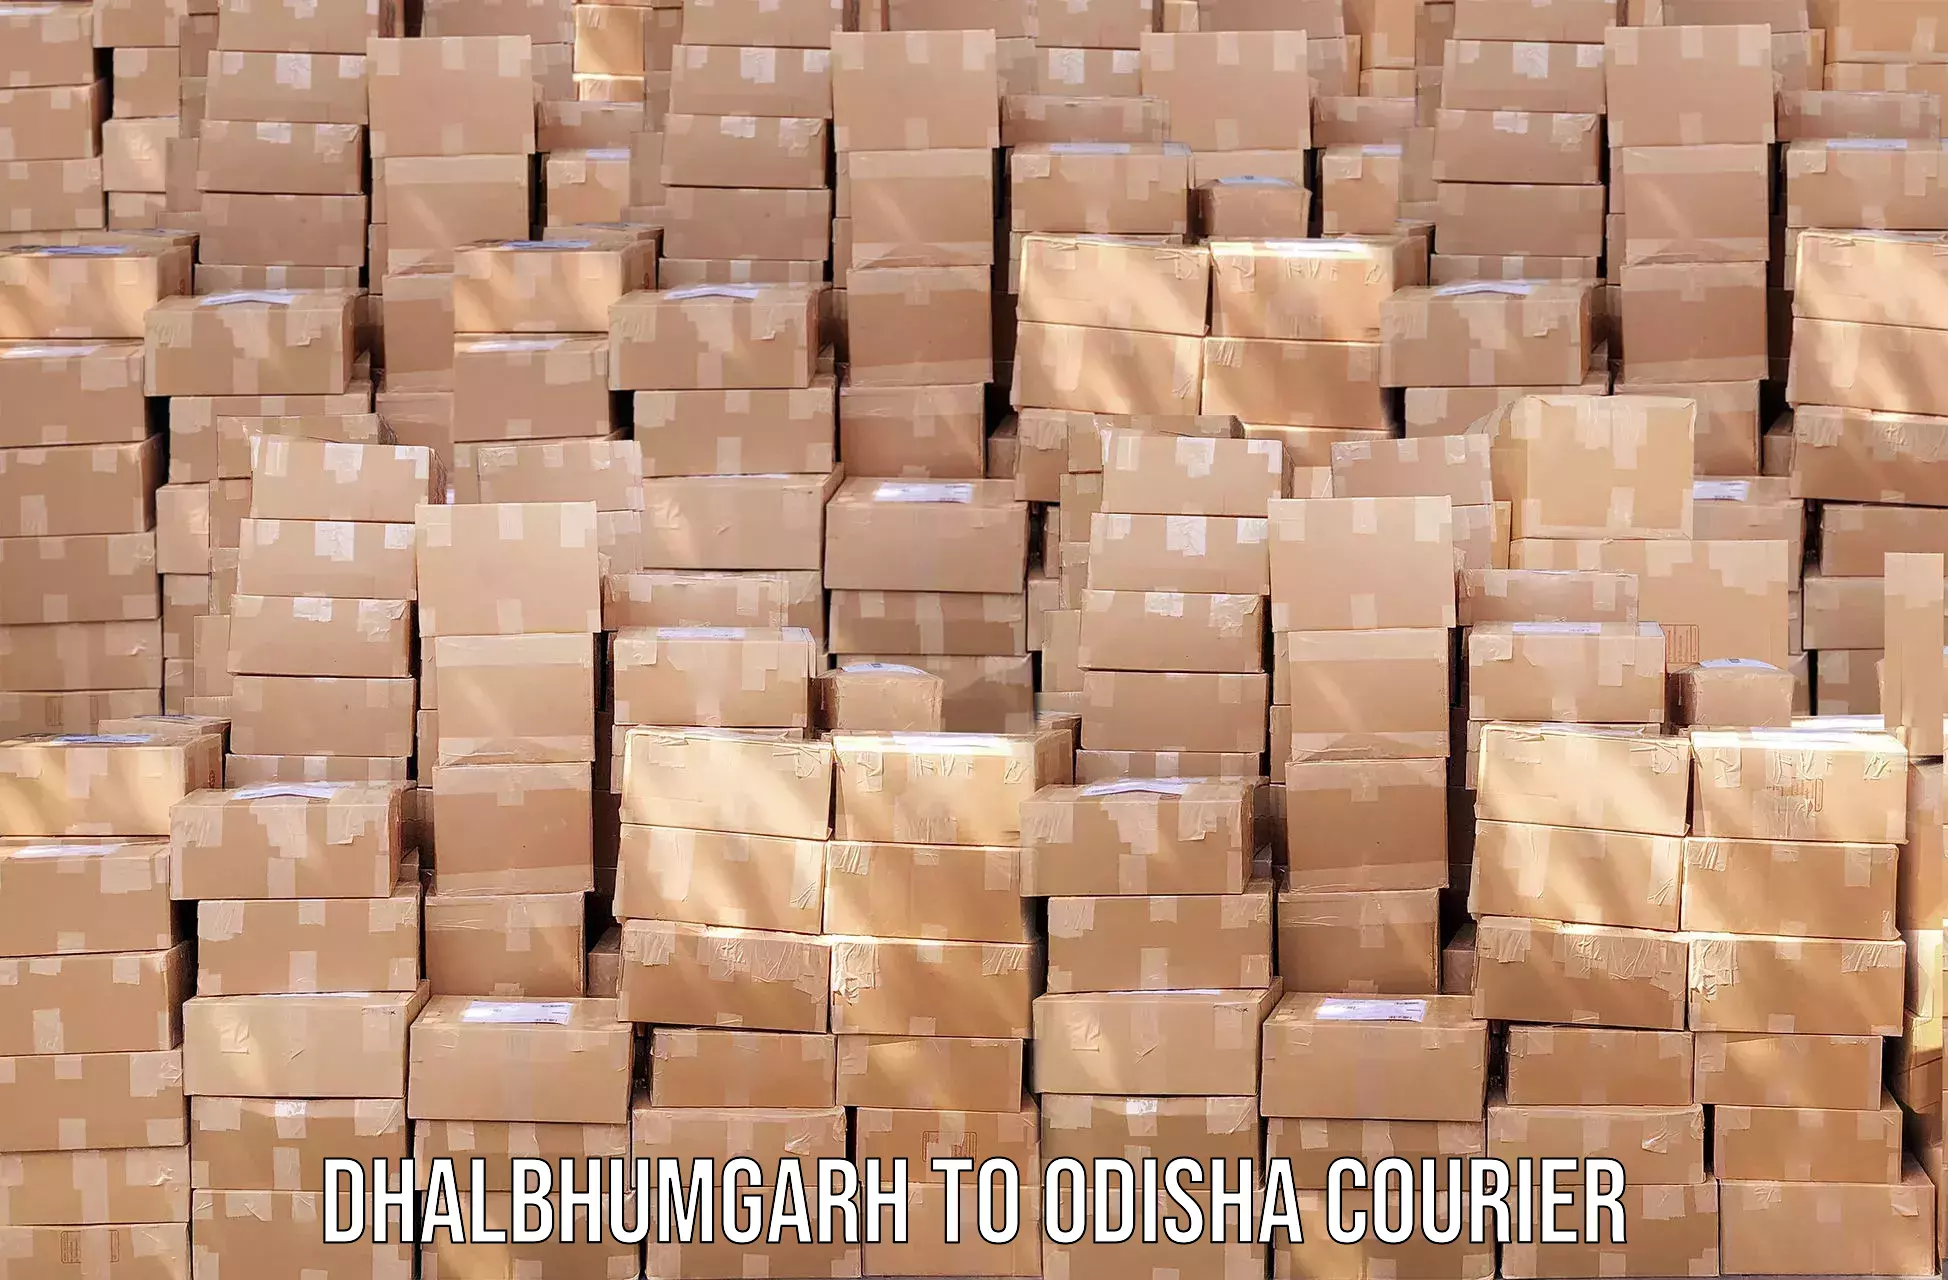 Easy access courier services in Dhalbhumgarh to Kuchinda